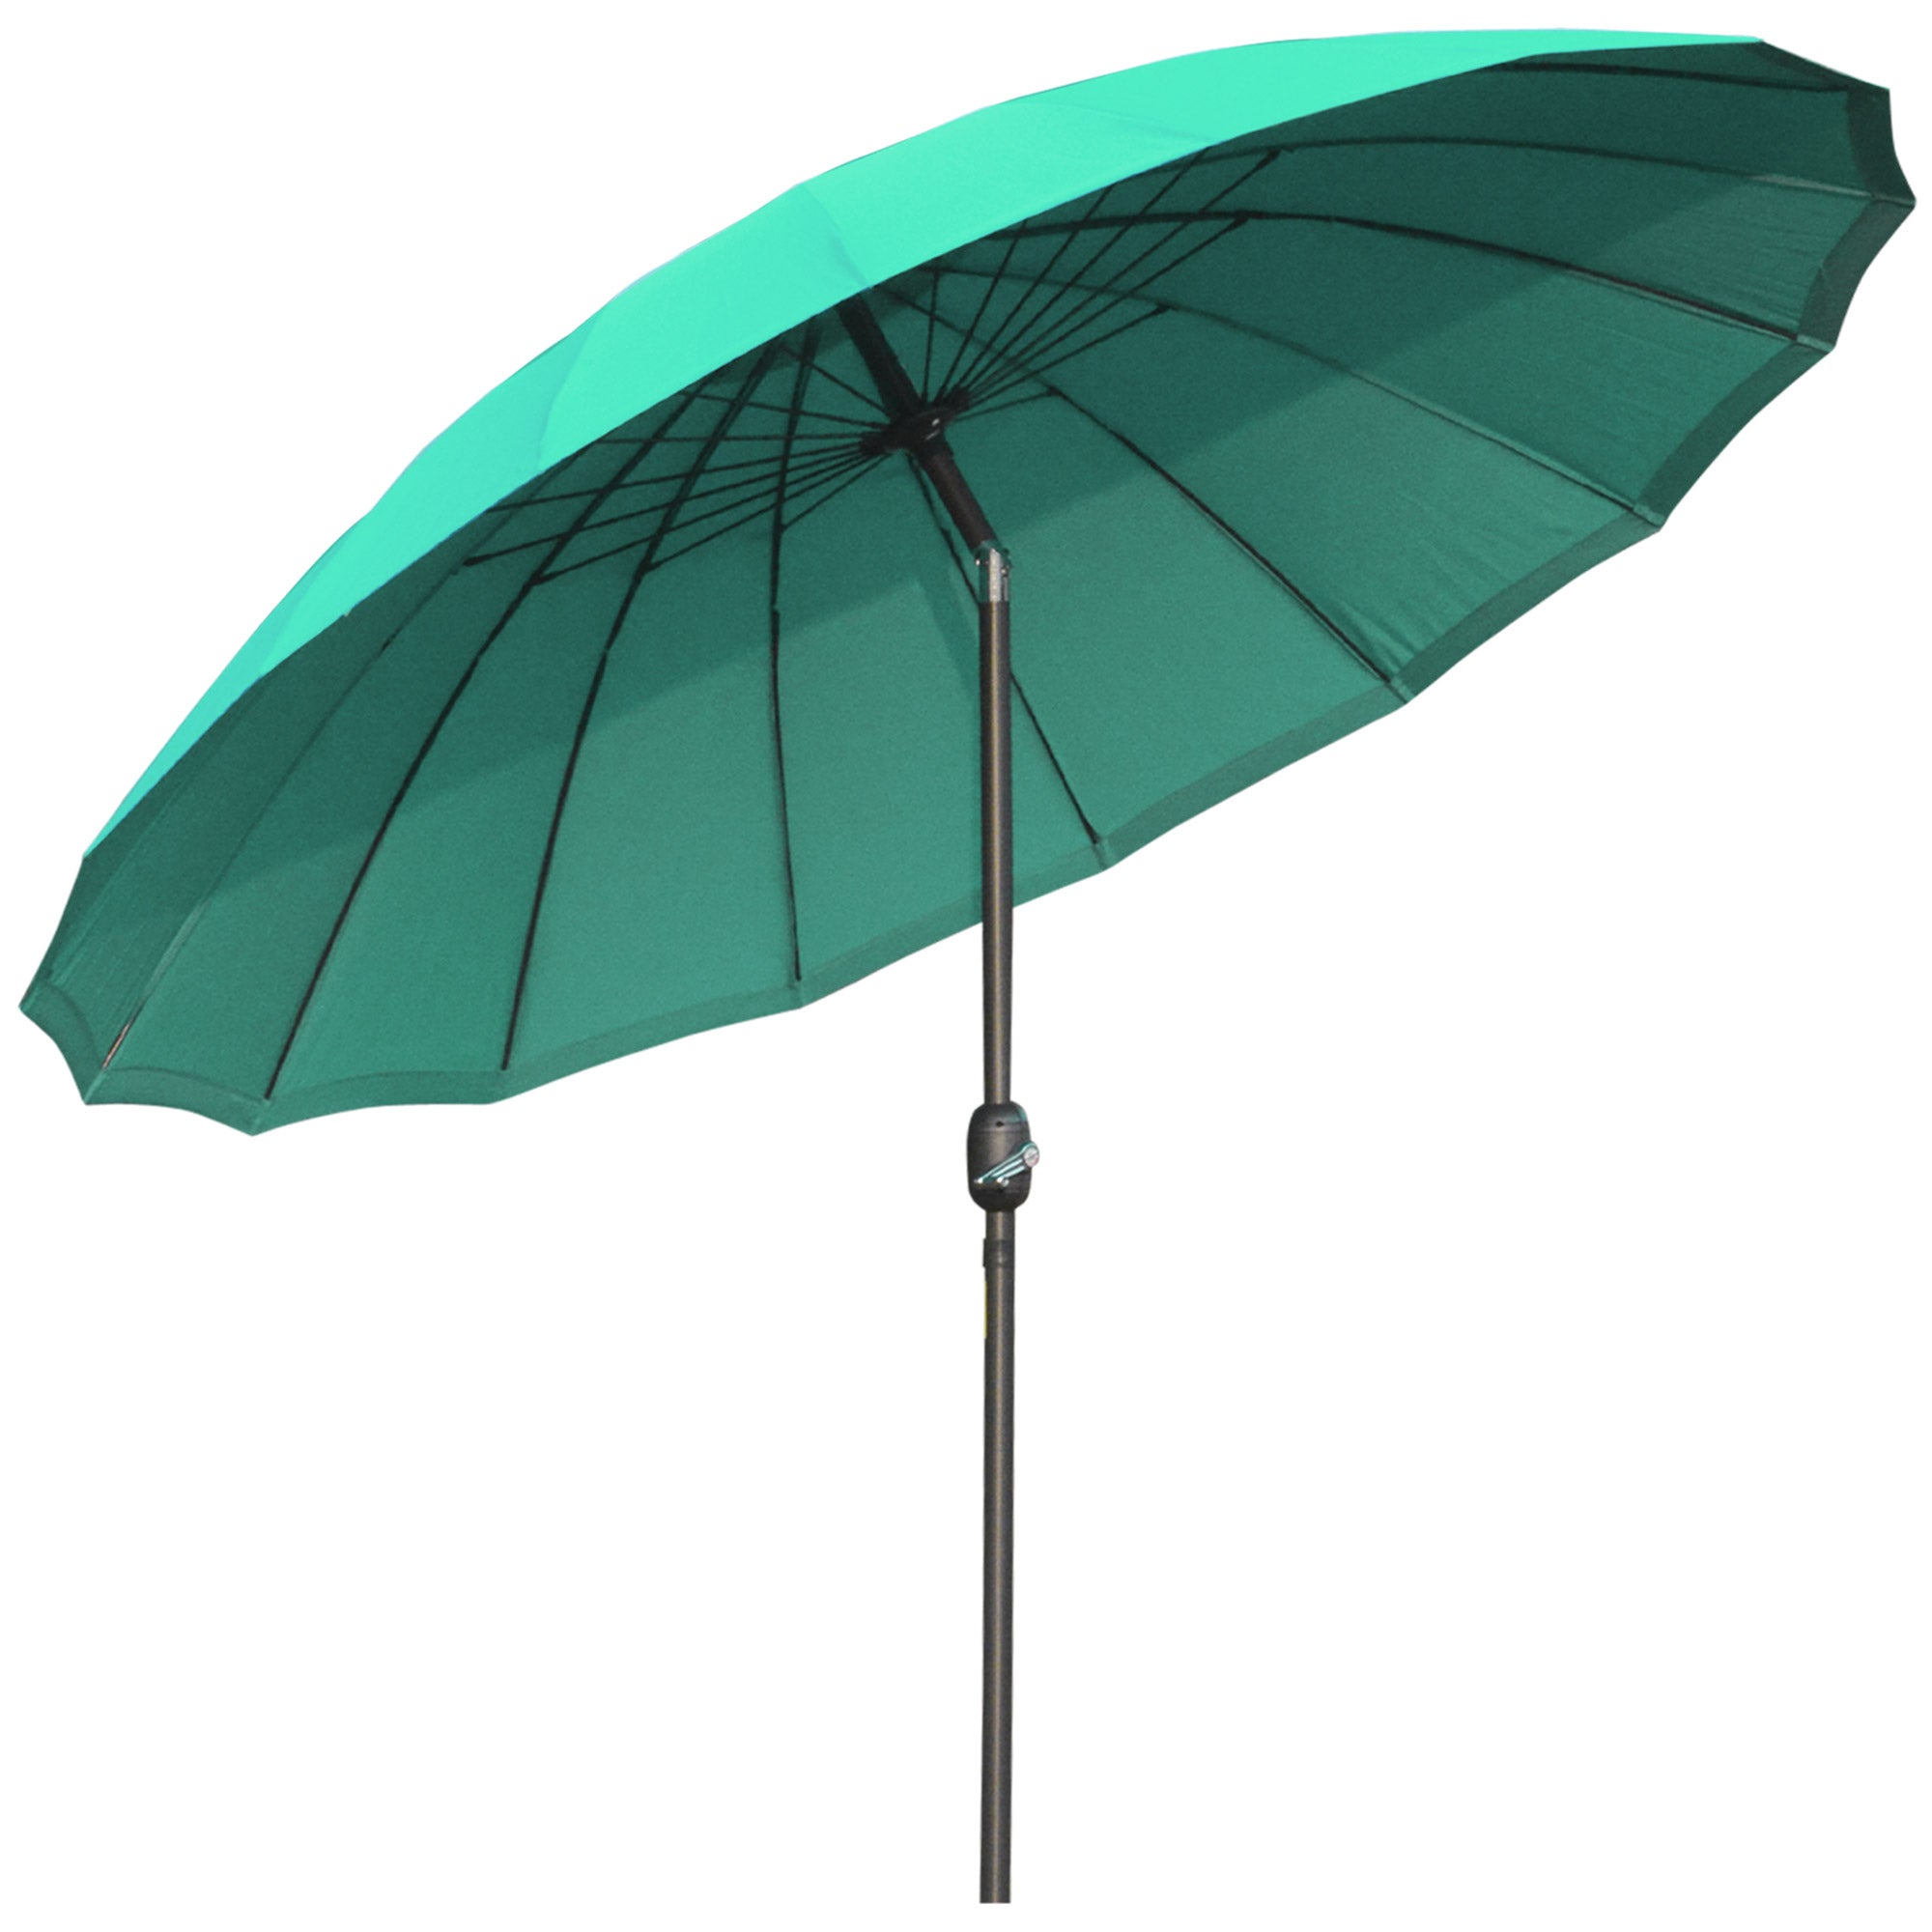 Ф255cm Patio Parasol Umbrella Outdoor Market Table Parasol with Push Button Tilt Crank and Sturdy Ribs for Garden Lawn Backyard Pool Green-0